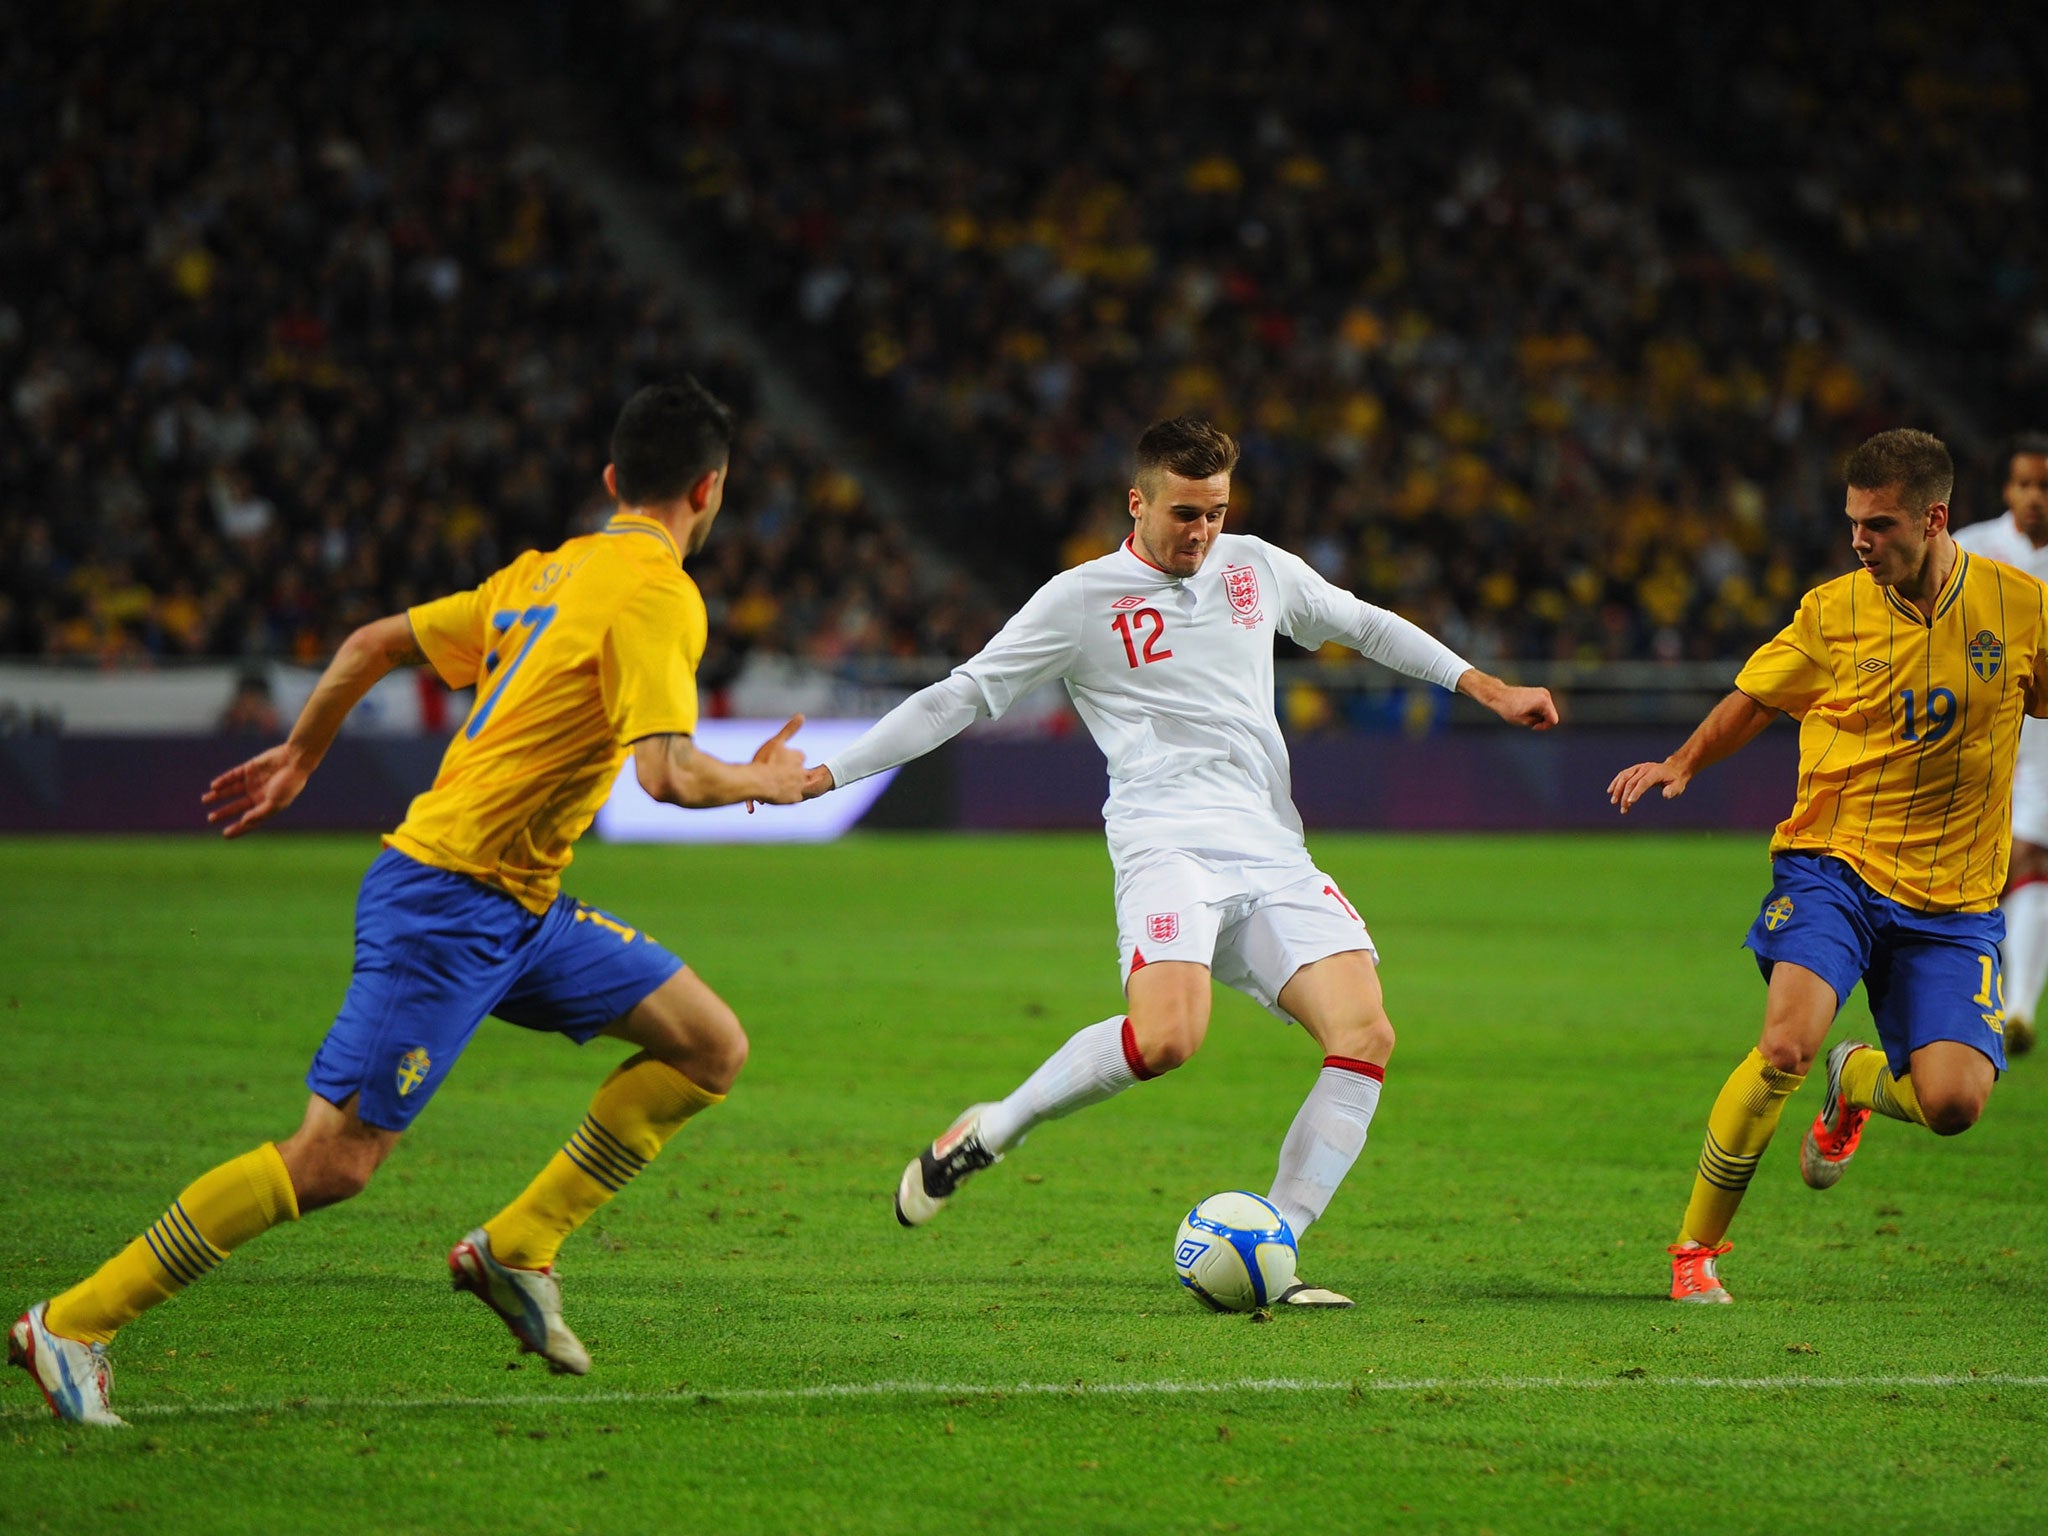 Carl Jenkinson made his debut for England in the international friendly against Sweden in November 2012